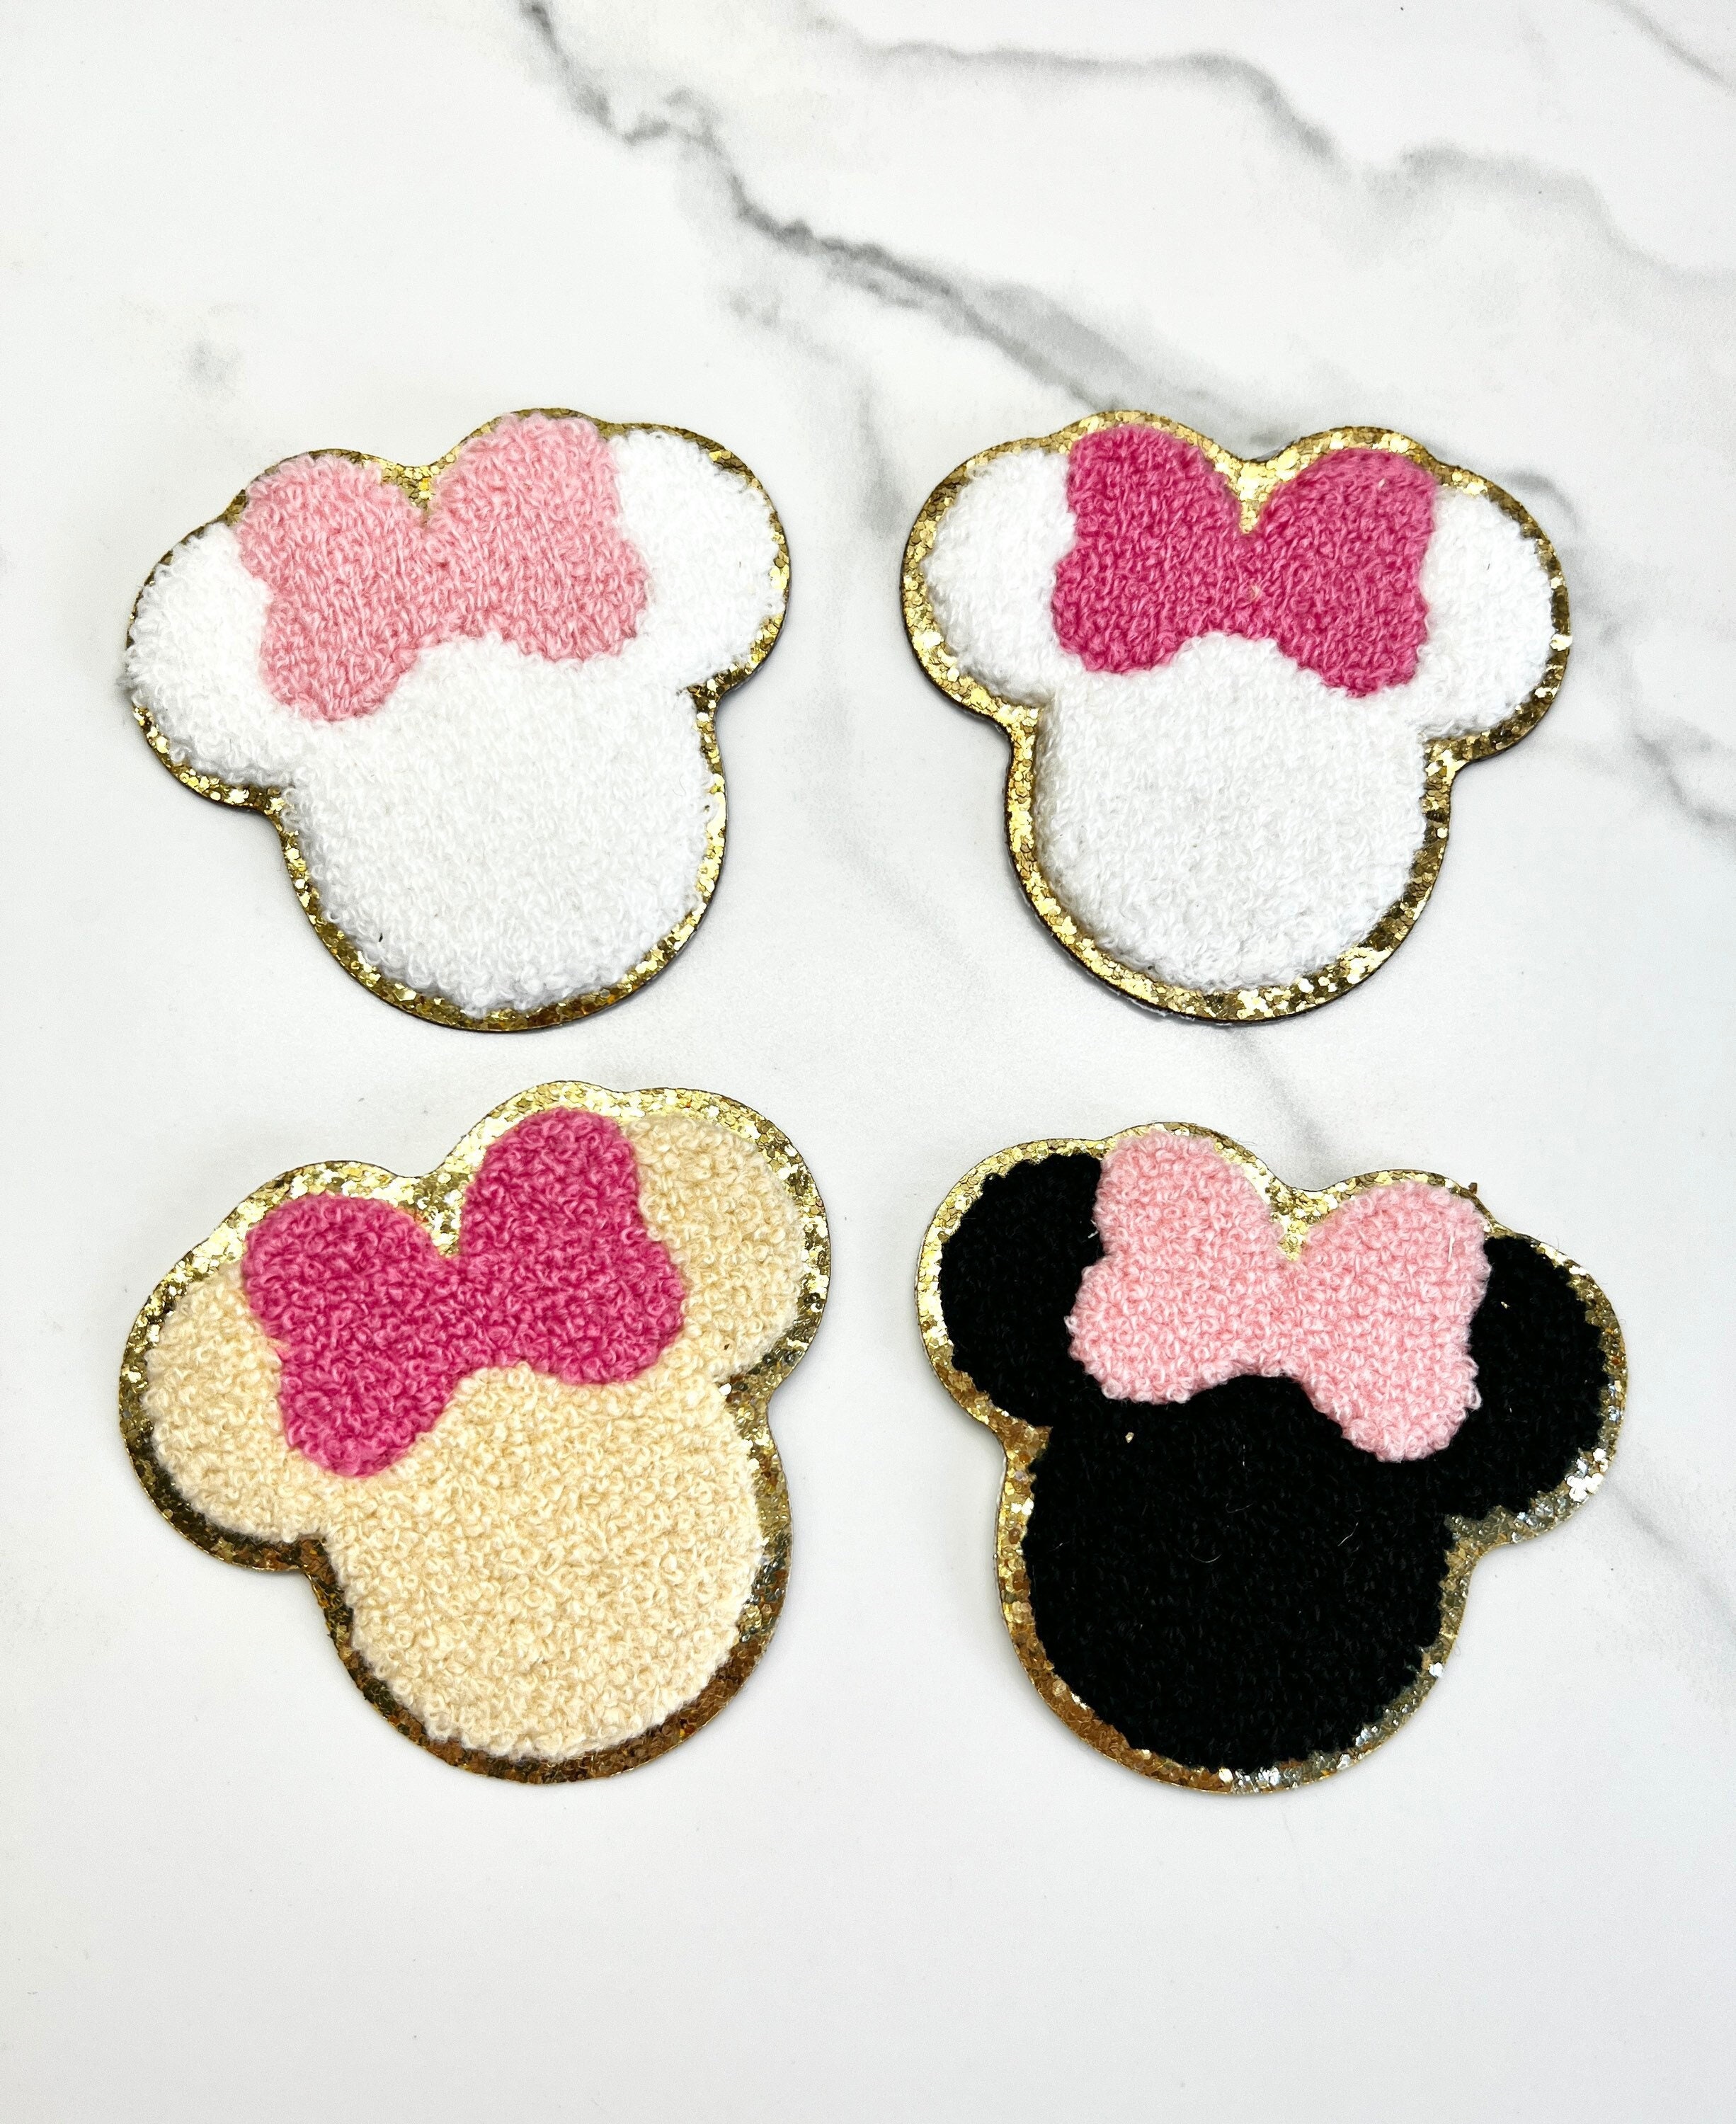 Minnie Mouse Head Patch Pink Bow Disney Chenille Iron On 